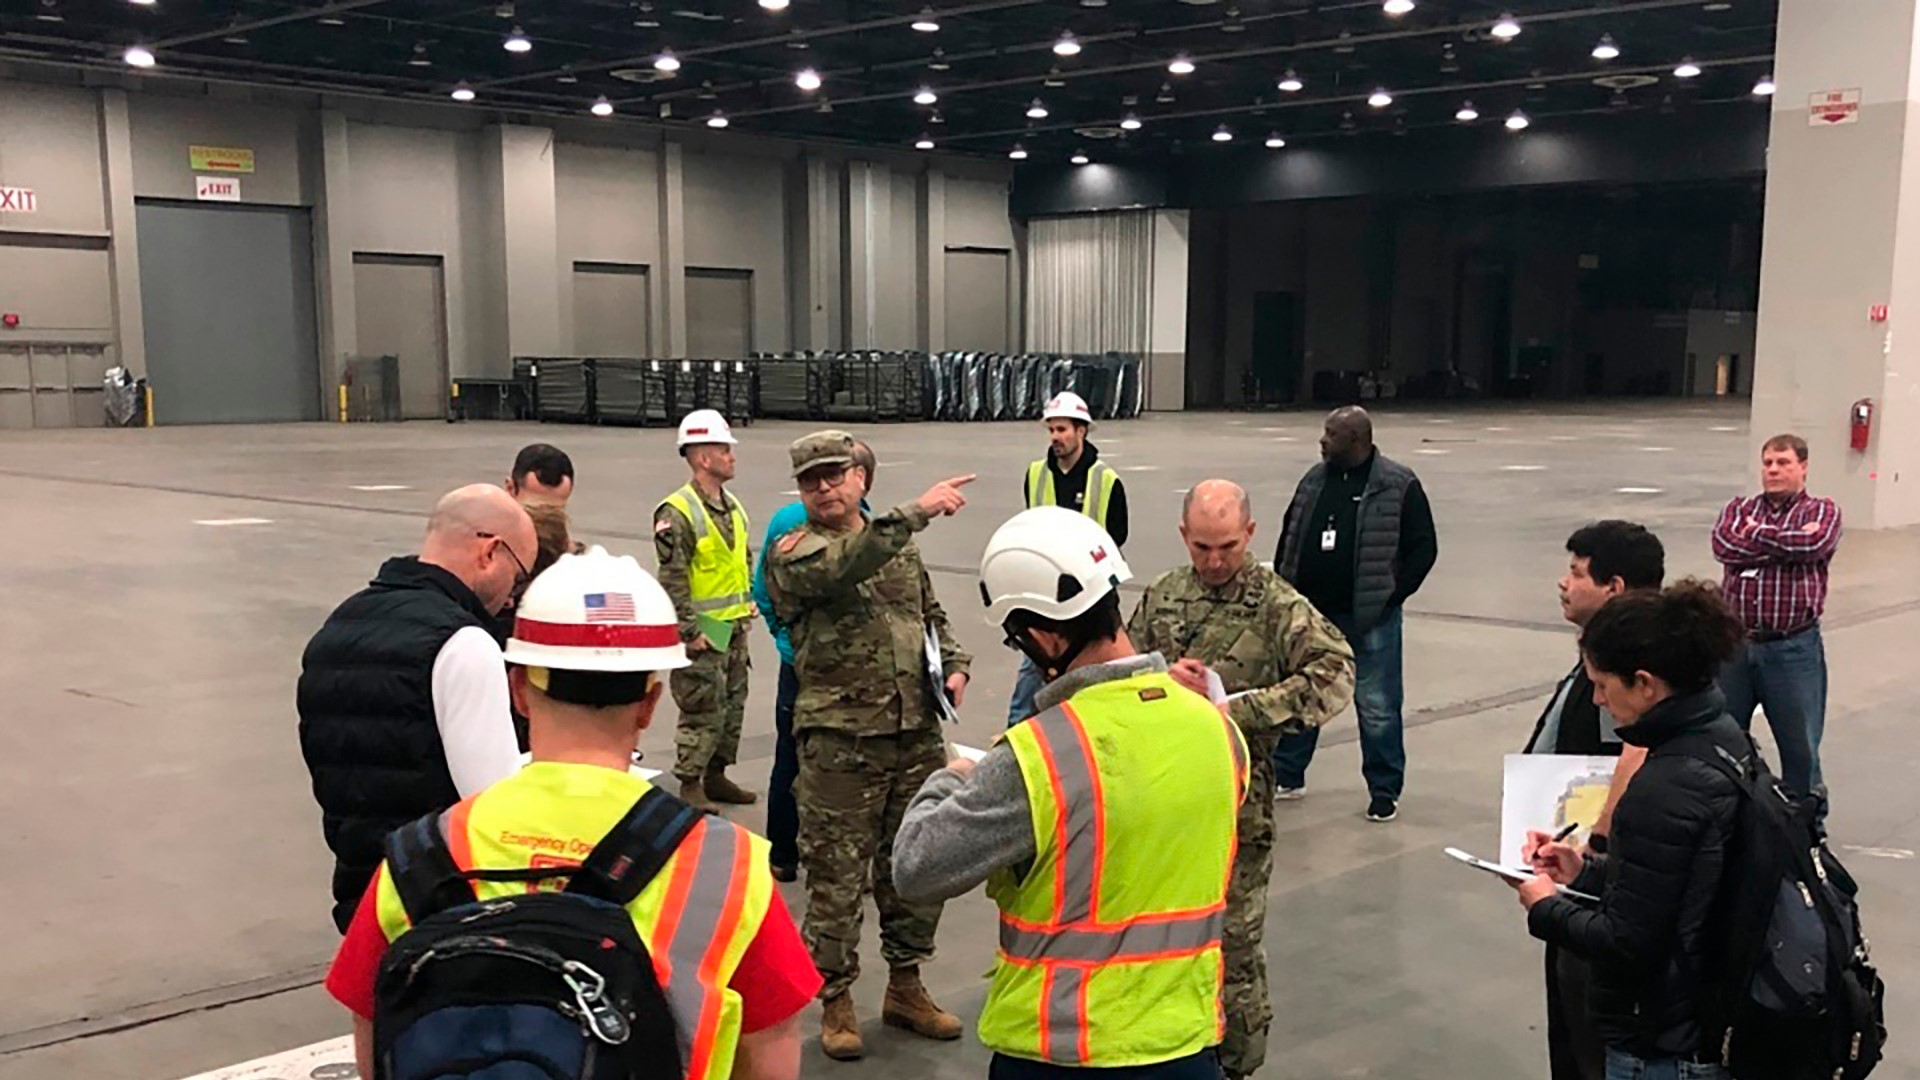 On Monday, March 30, President Donald Trump approved Michigan's request for the National Guard to perform humanitarian missions across the state.